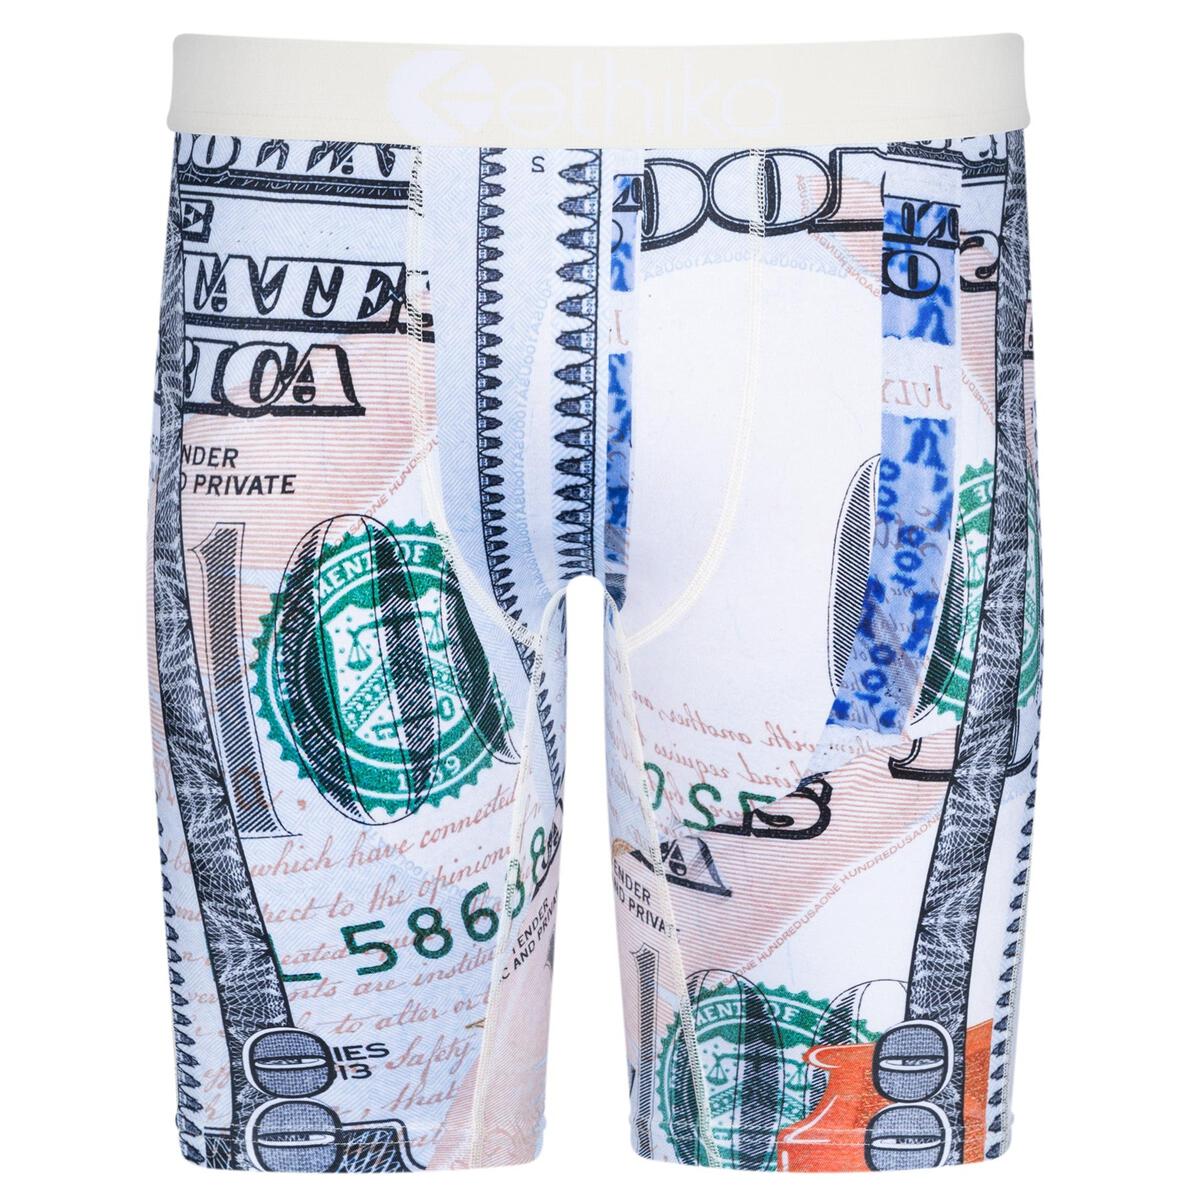 Ethika Underwear (100+ products) compare price now »